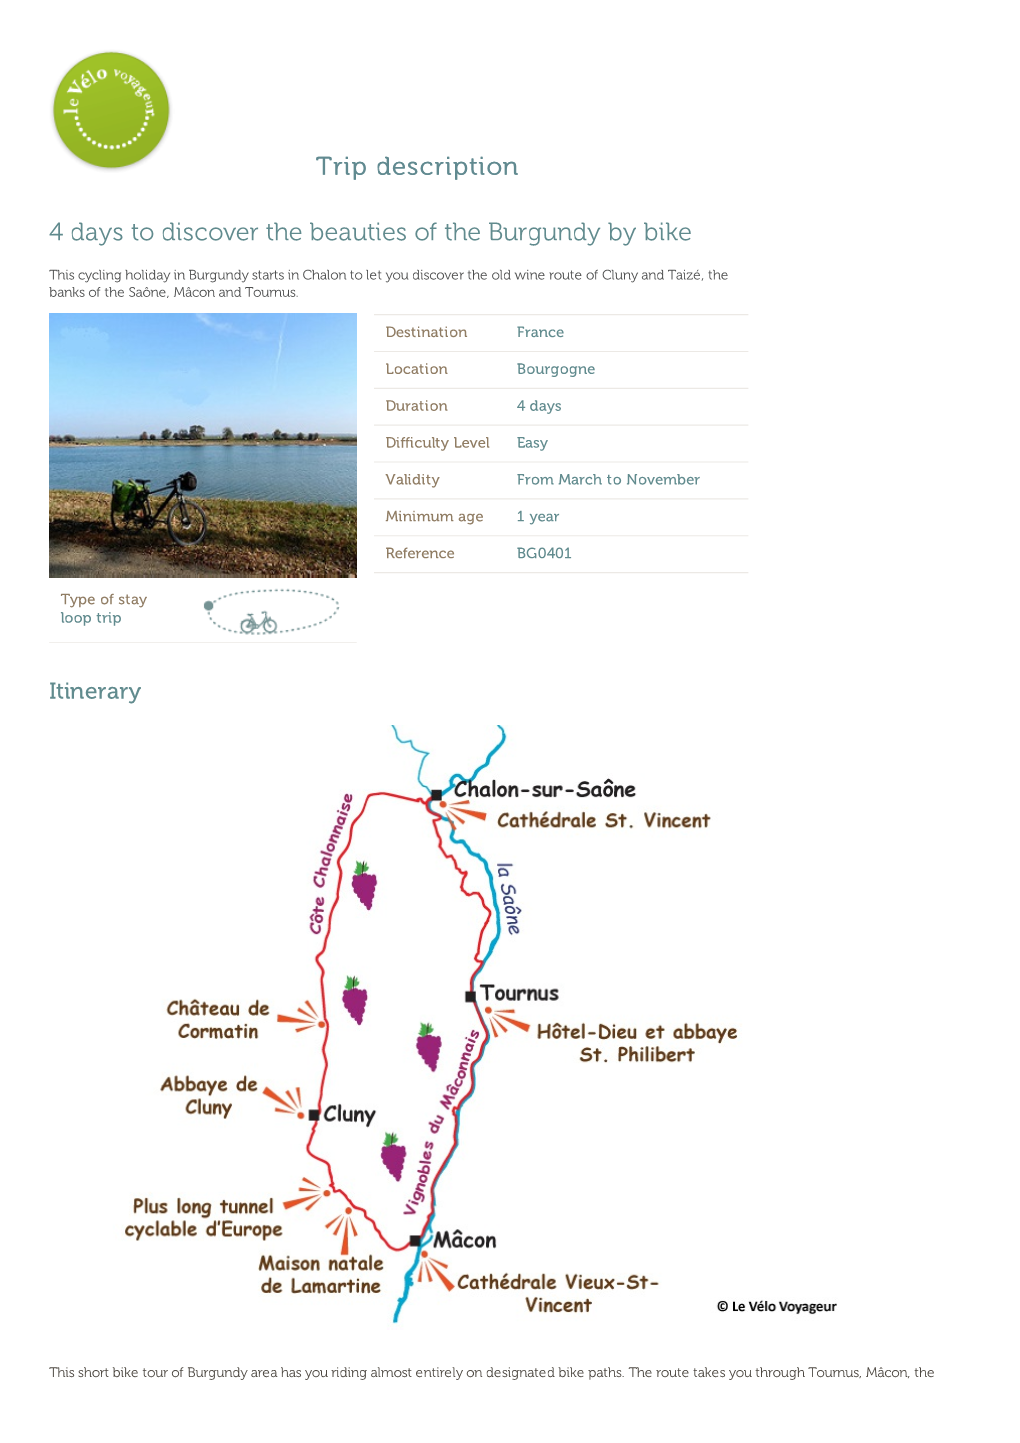 Trip Description 4 Days to Discover the Beauties of the Burgundy by Bike